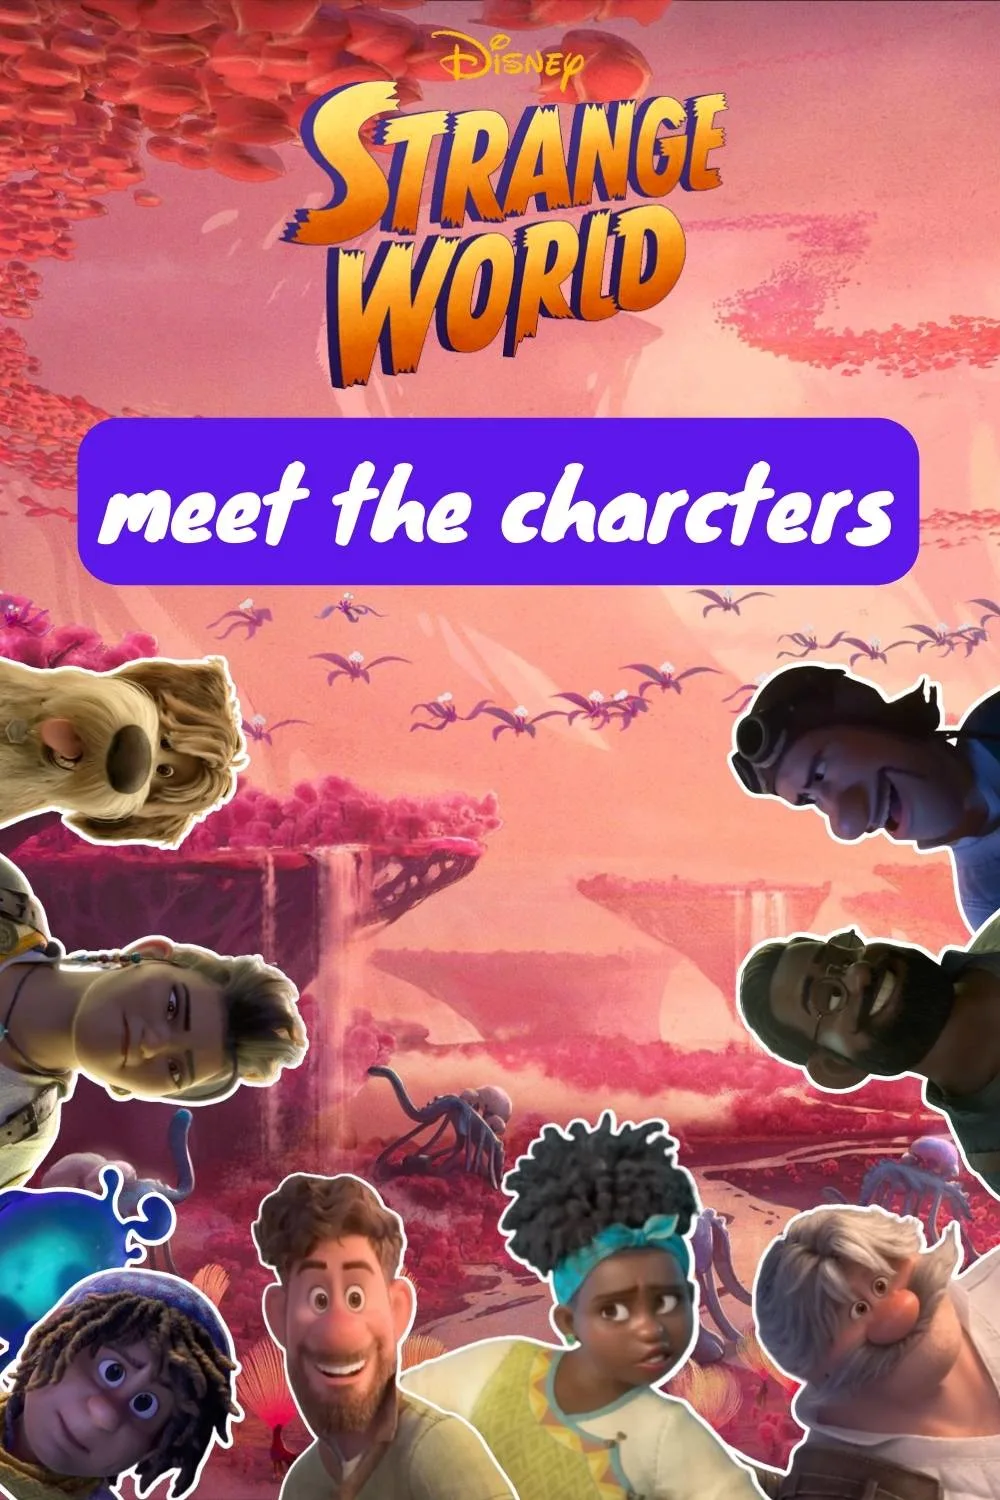 Meet the characters from Strange World